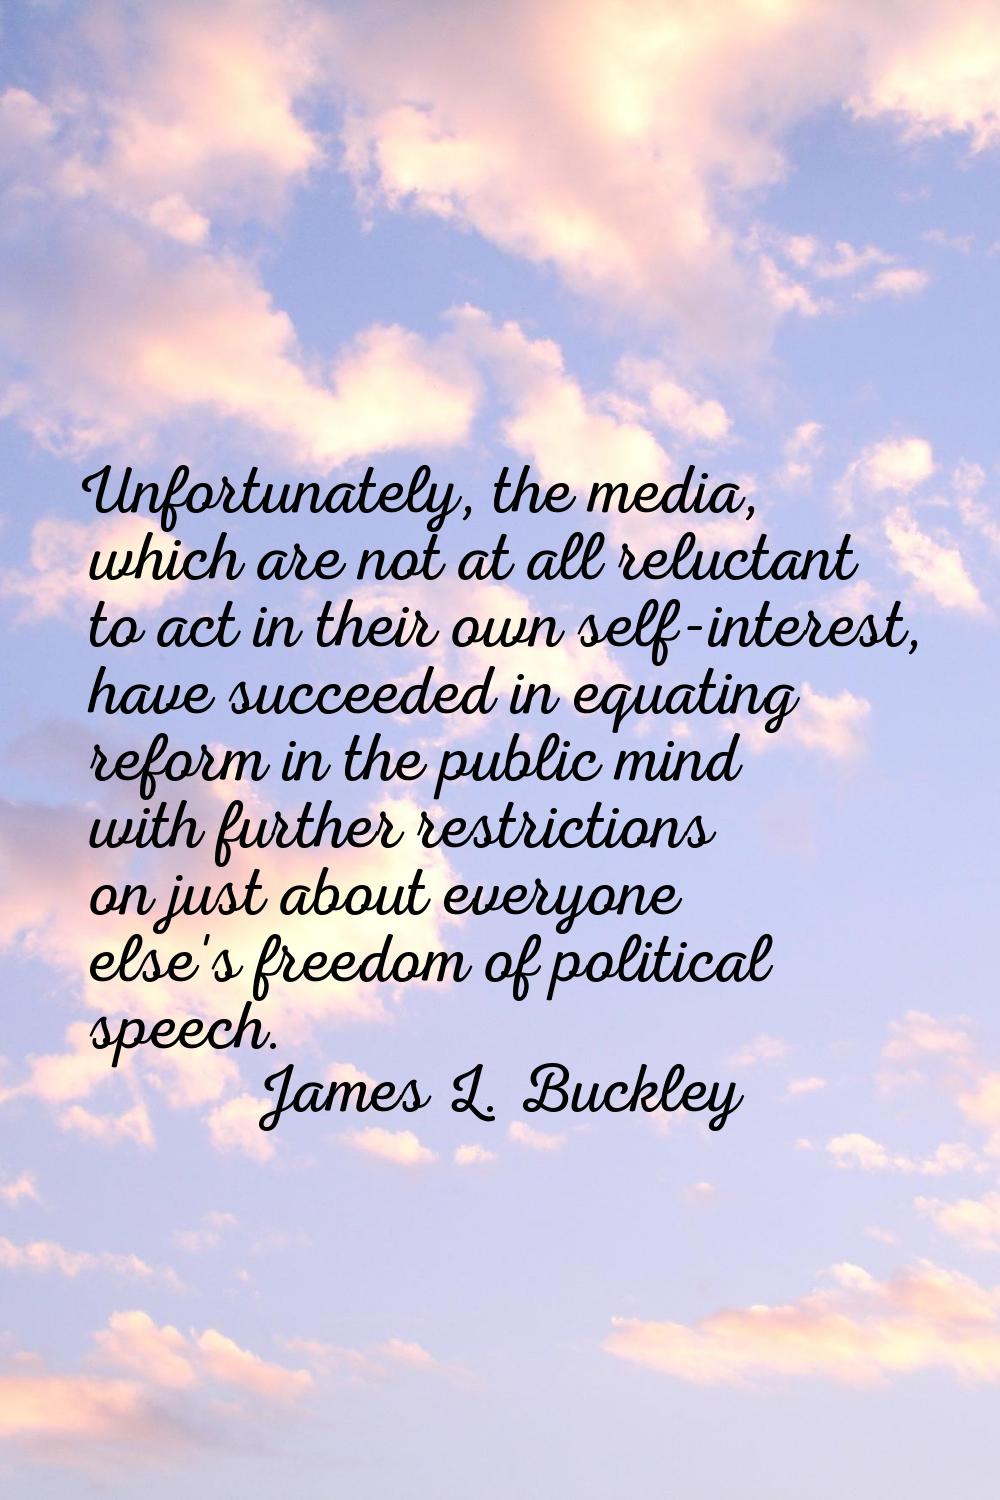 Unfortunately, the media, which are not at all reluctant to act in their own self-interest, have su